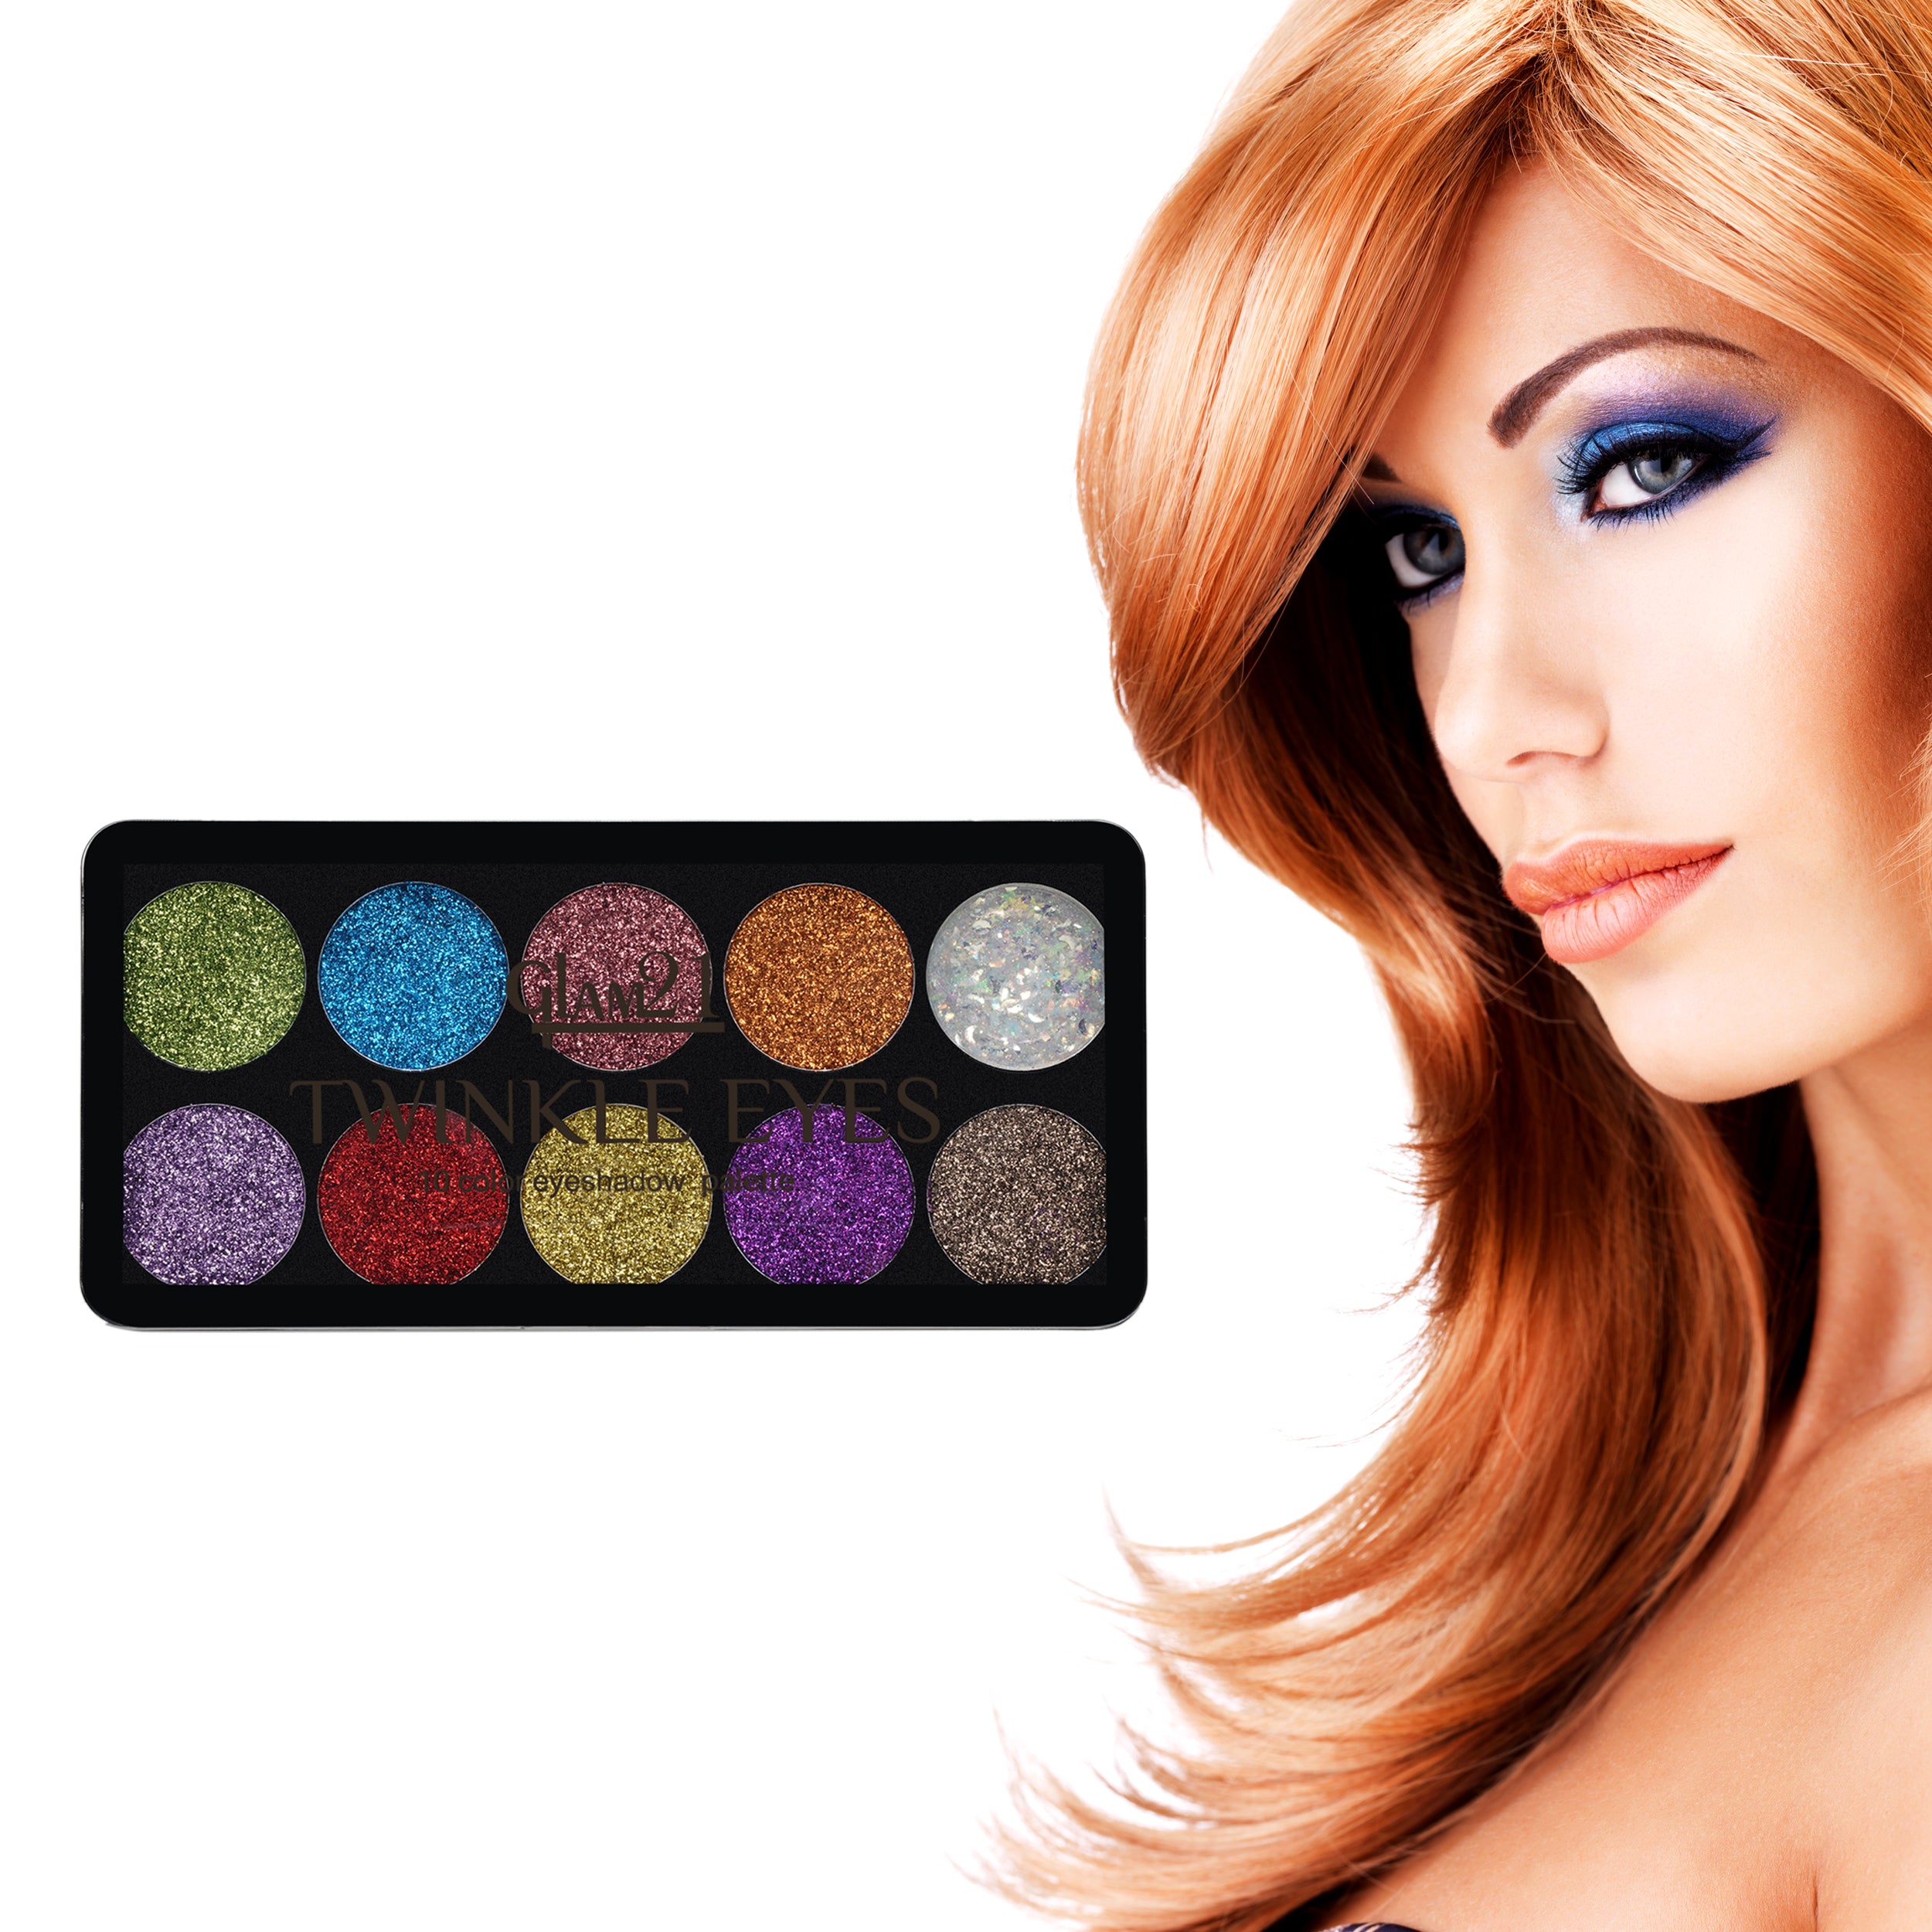 Glam21 Twinkle Eyes Glitter Palette|10 Cream Based Highly Pigmented Shades|Non Sticky Look -13gm-02-NA-13gm